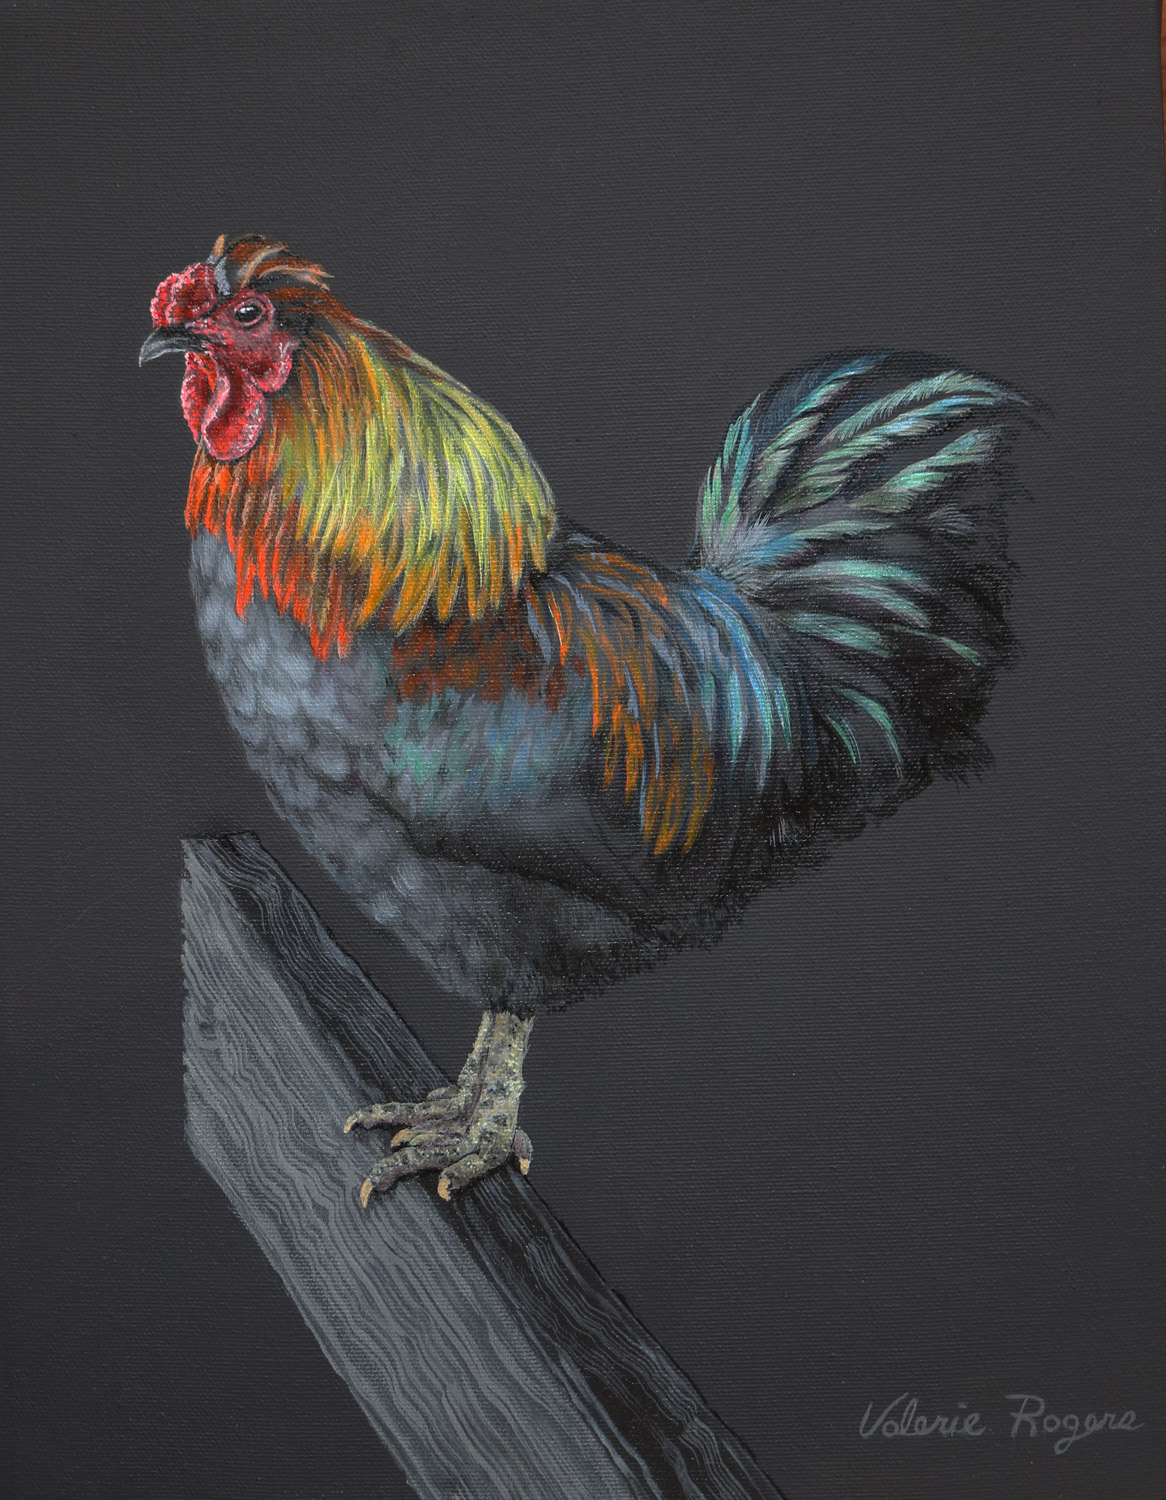 Out of the Dark Rooster by Valerie Rogers